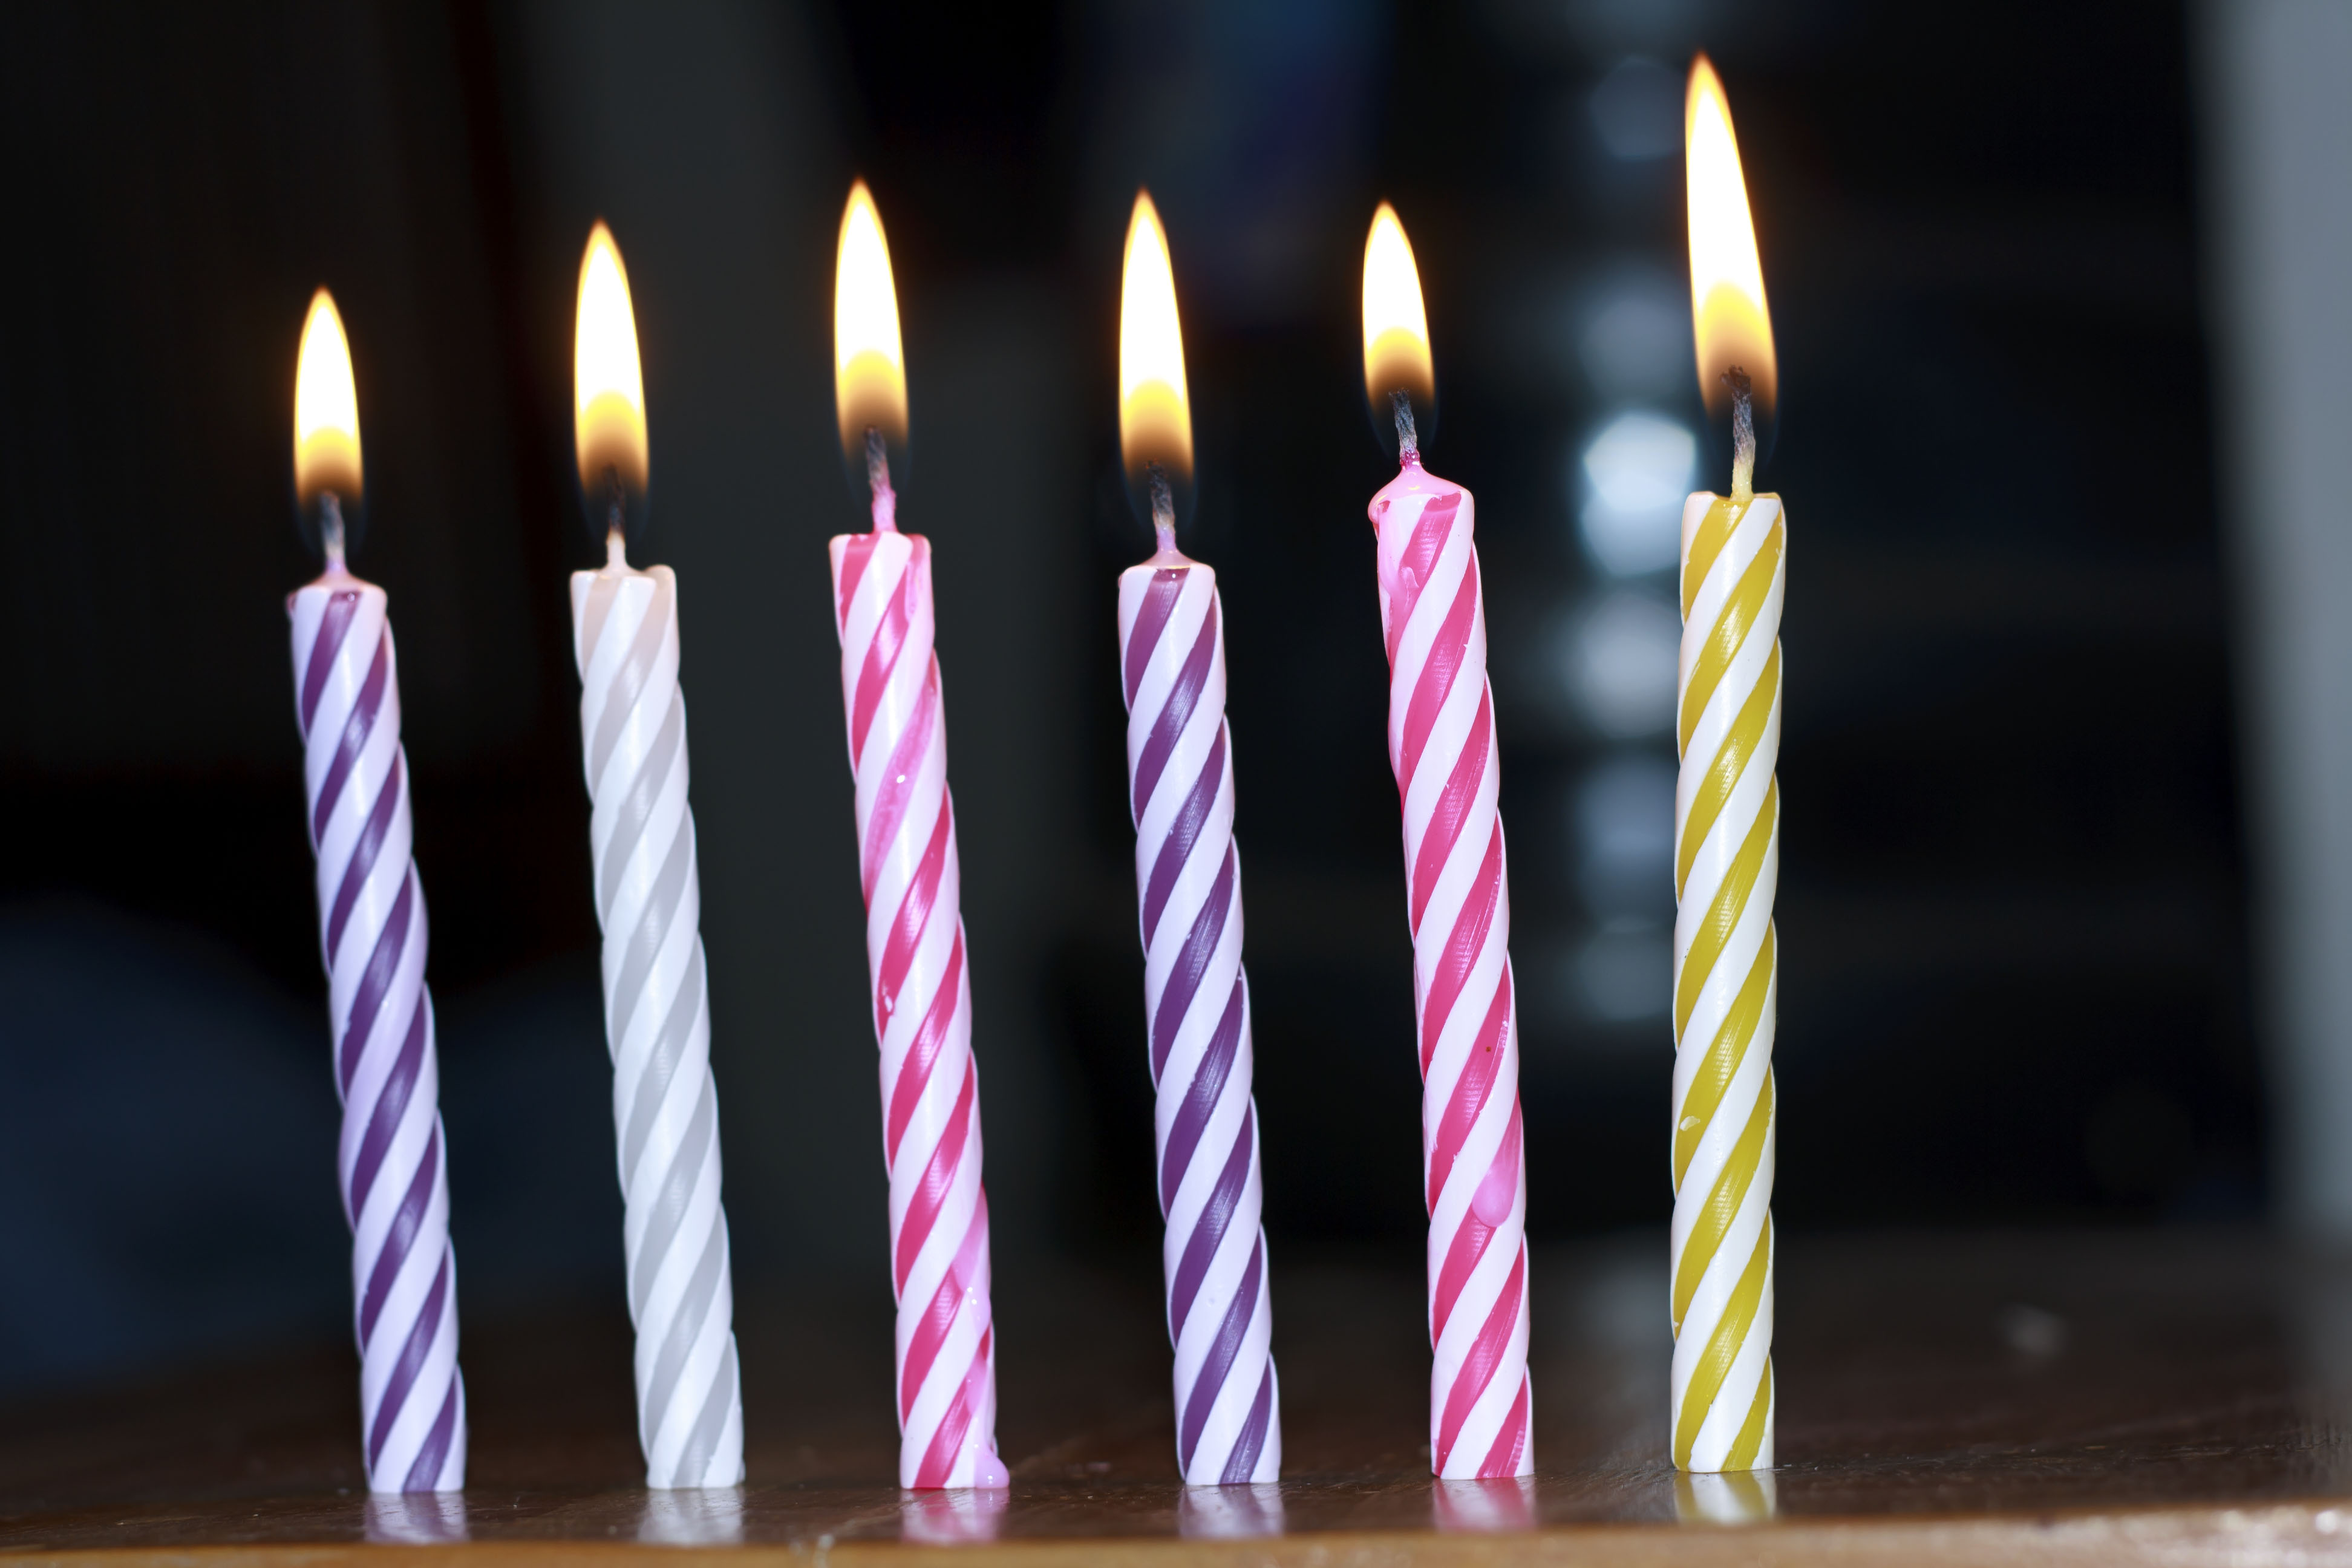 Clipart library: More Like light the birthday candles by fantanicity